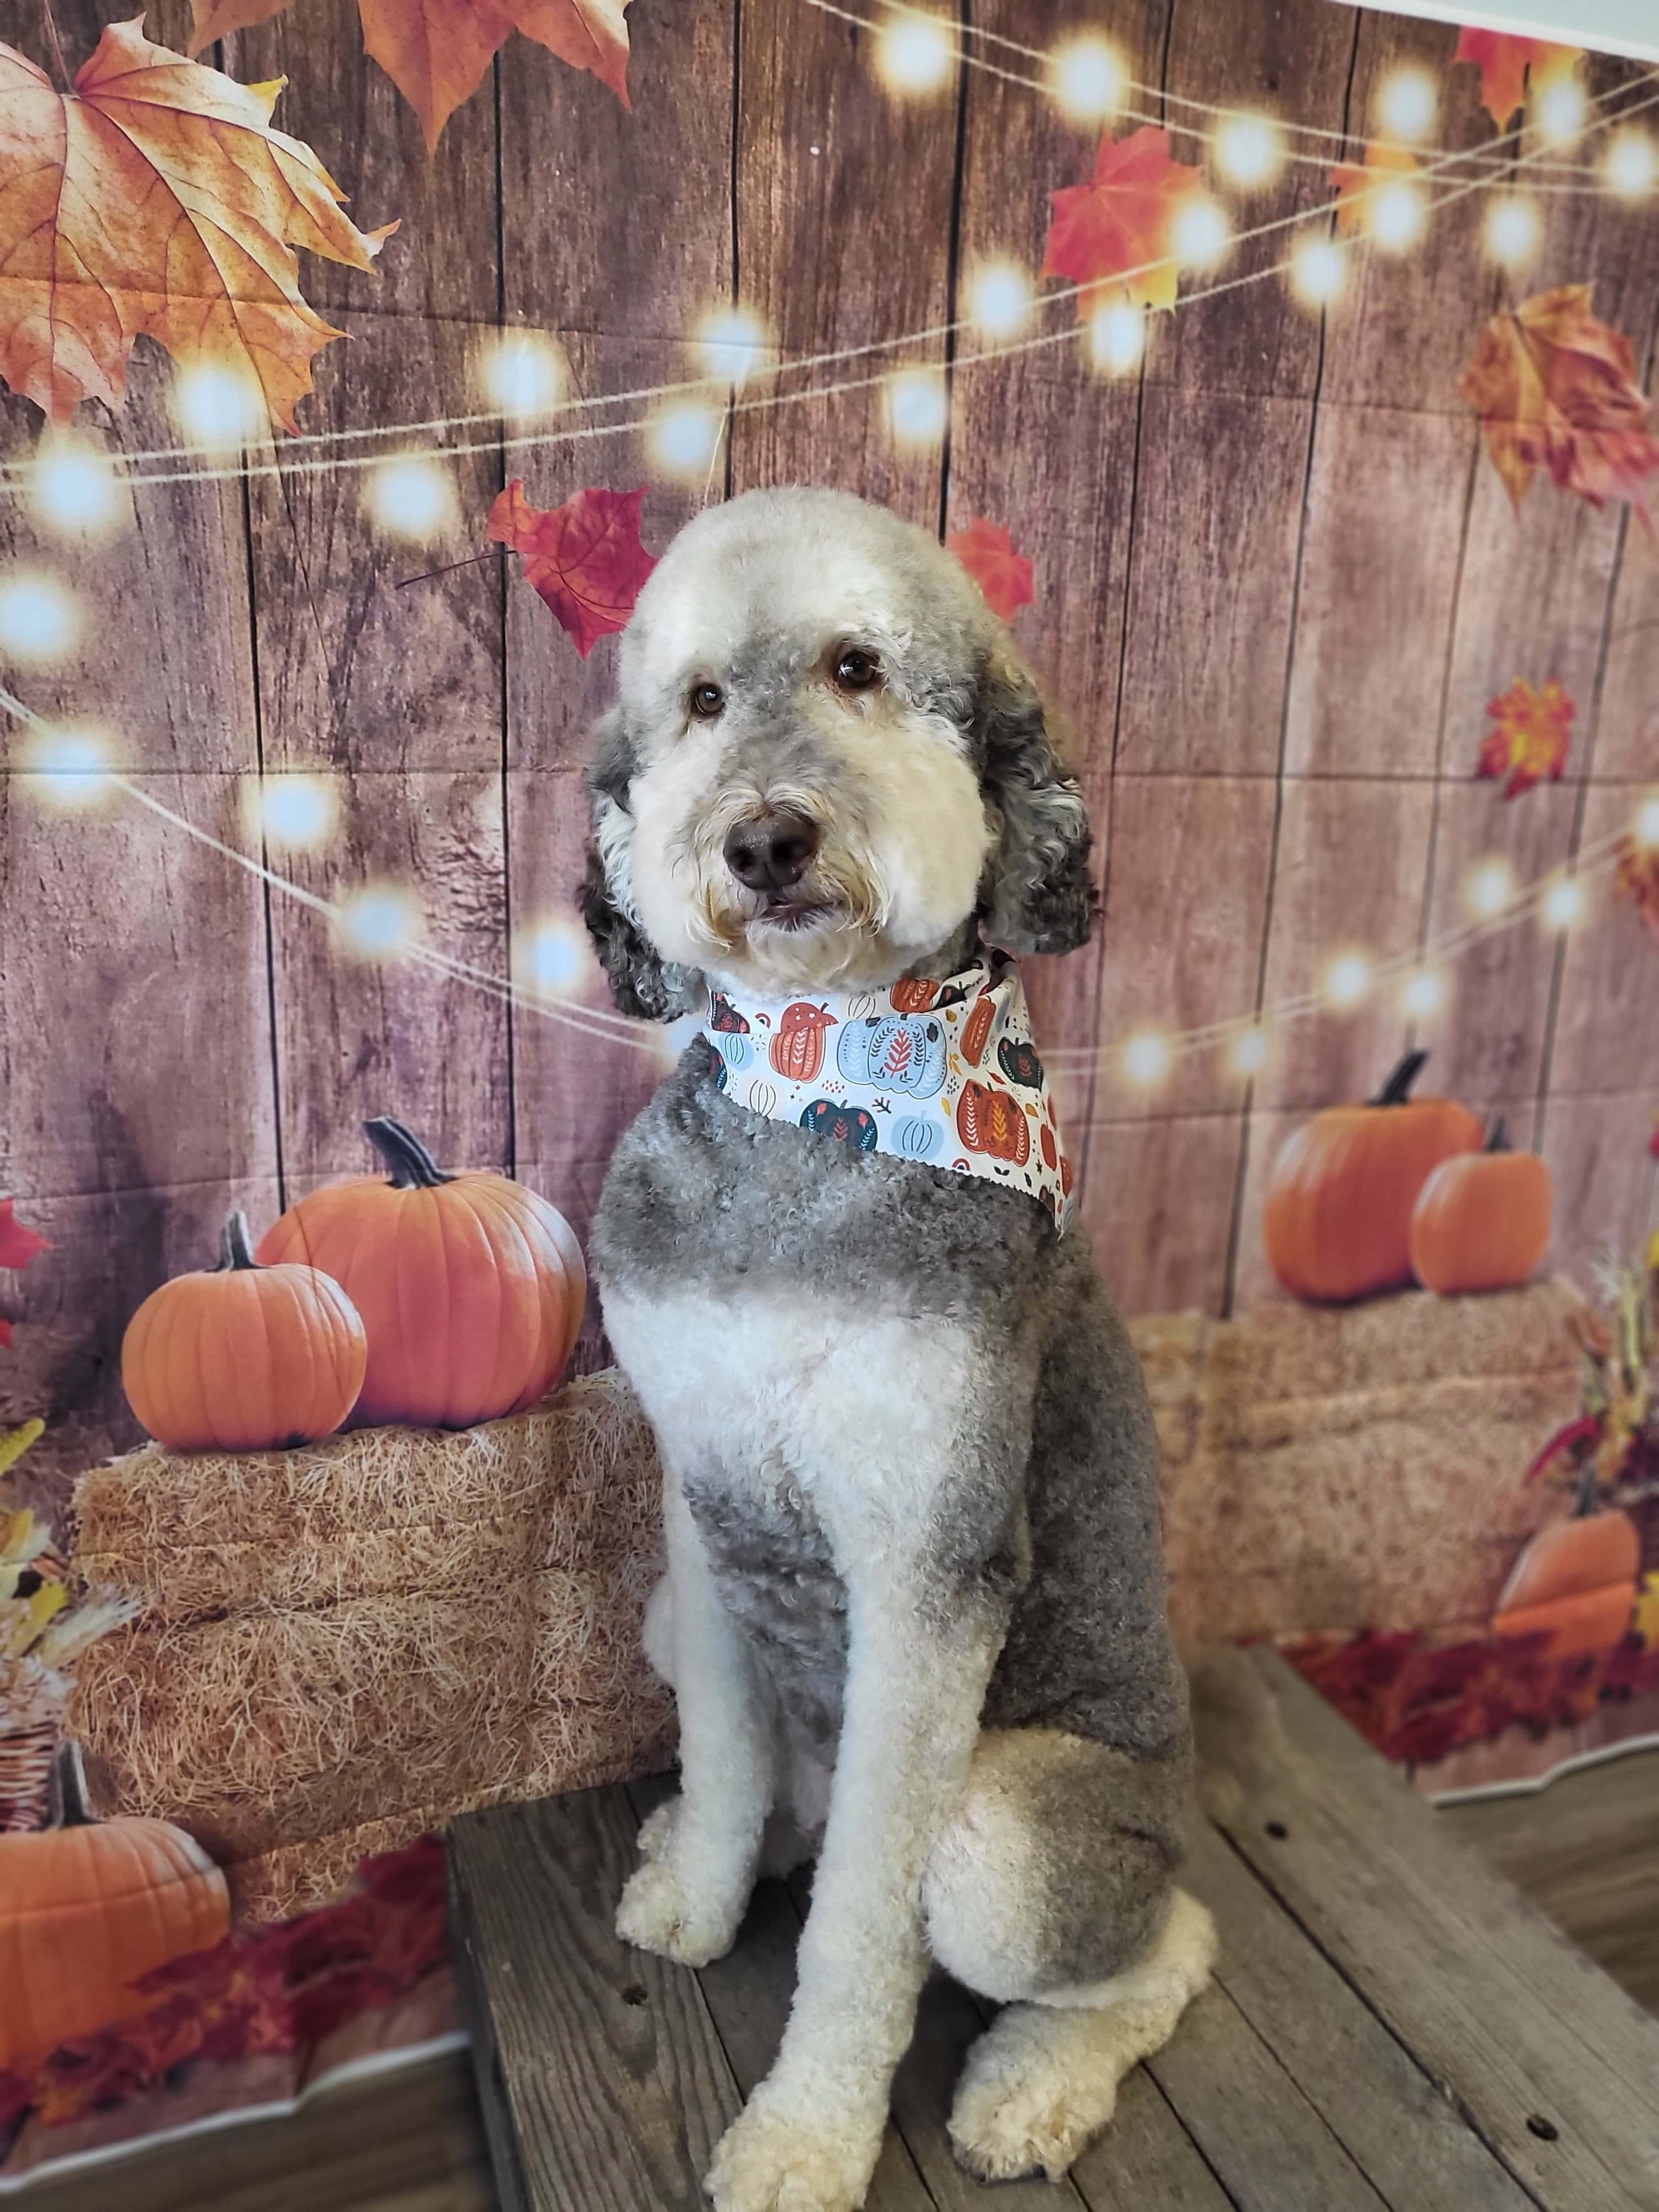 Southern Styles Dog Grooming - Cibolo, TX, US, cheap groomers near me